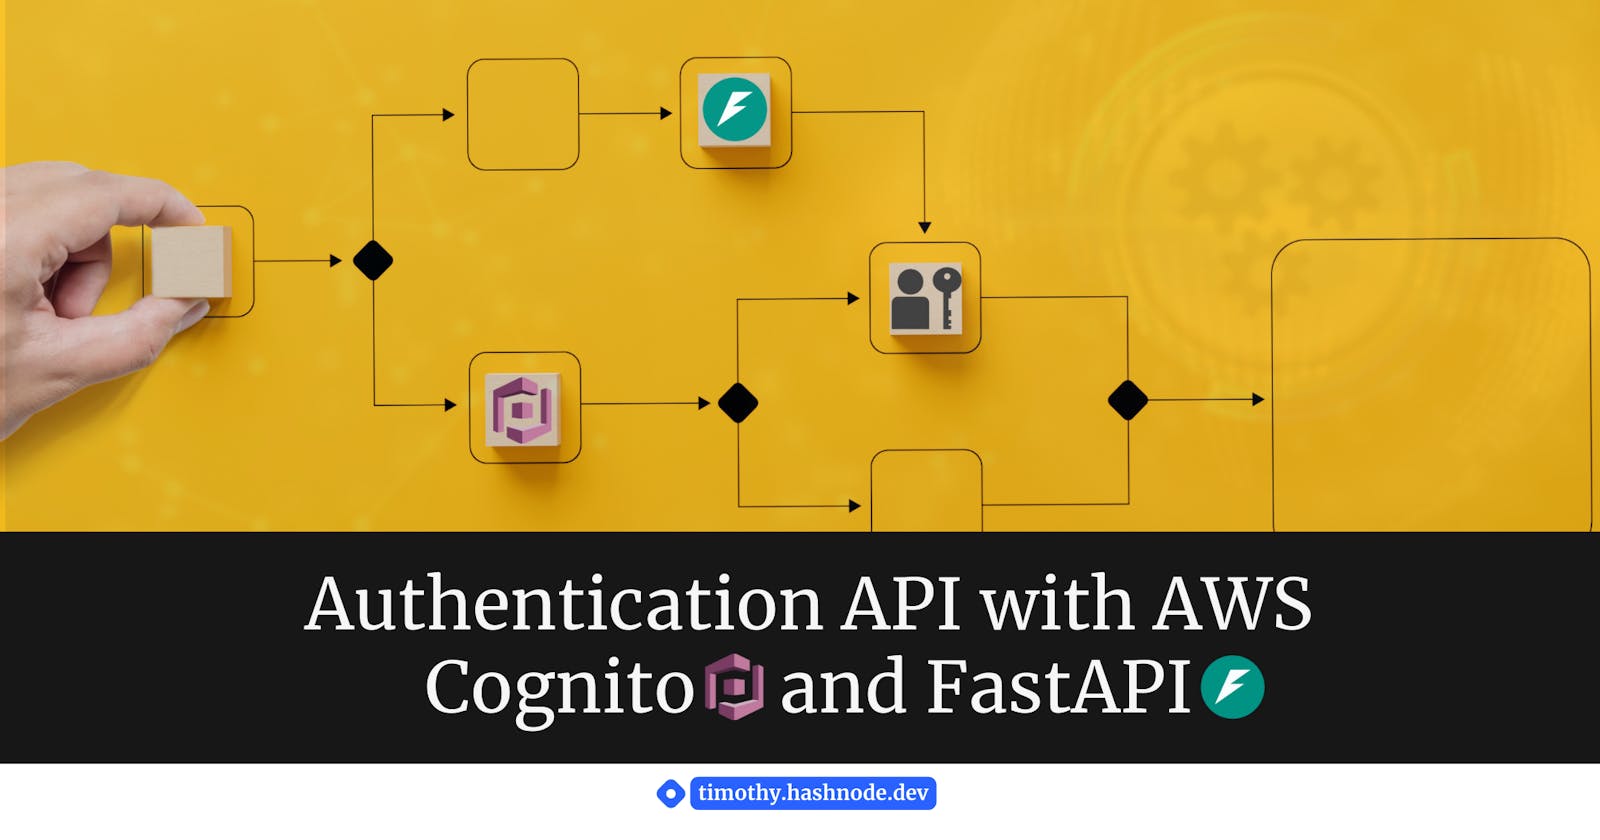 Building an Authentication API with AWS Cognito and FastAPI